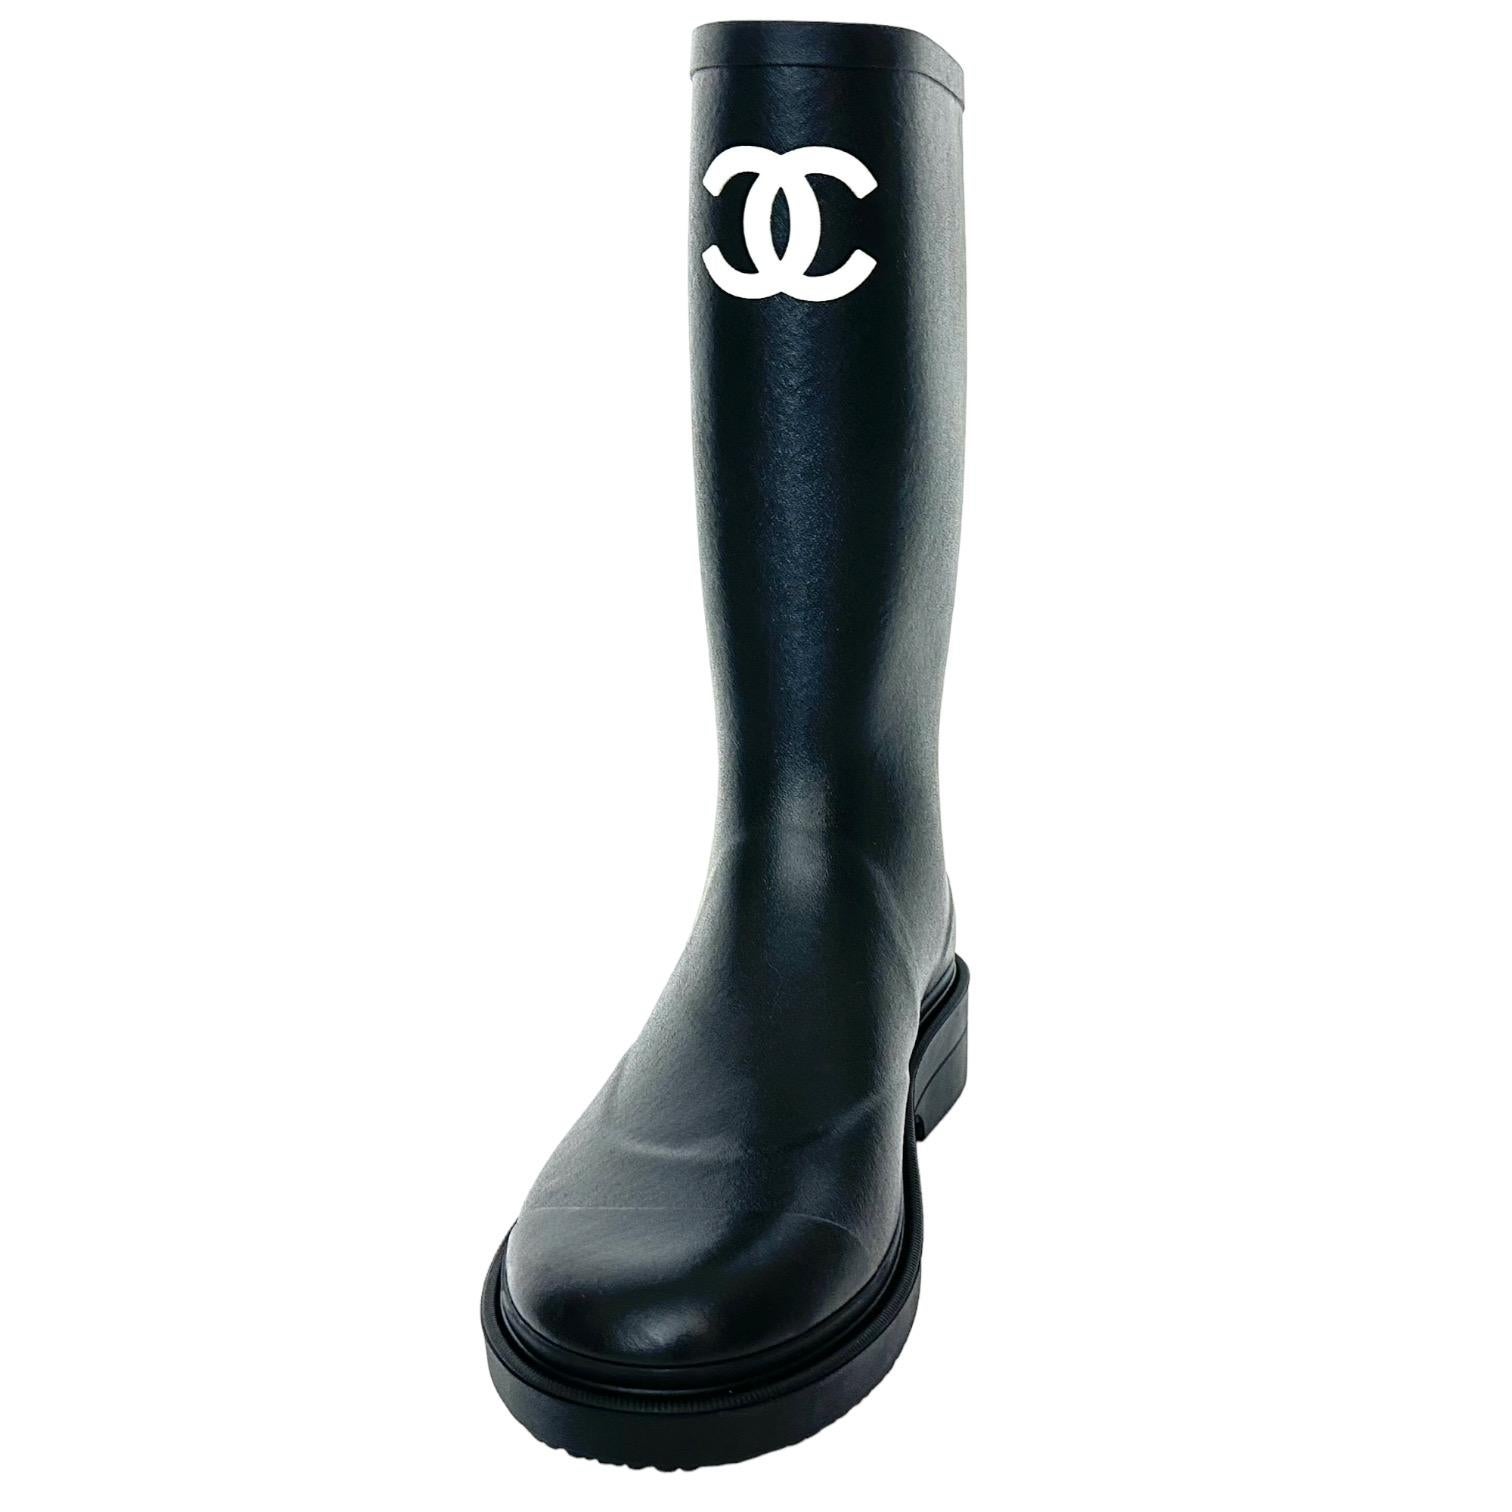 GUARANTEED AUTHENTIC CHANEL RUNWAY BLACK CAOUTCHOUC RUBBER KNEE HIGH BOOTS

Design:
- Black rubber knee-high boots.
- White CC logo at front.
- Rounded toe.
- Pull.
- Comes with original dust bags and box.

Size: 38

Measurement (Approximate):
Shaft